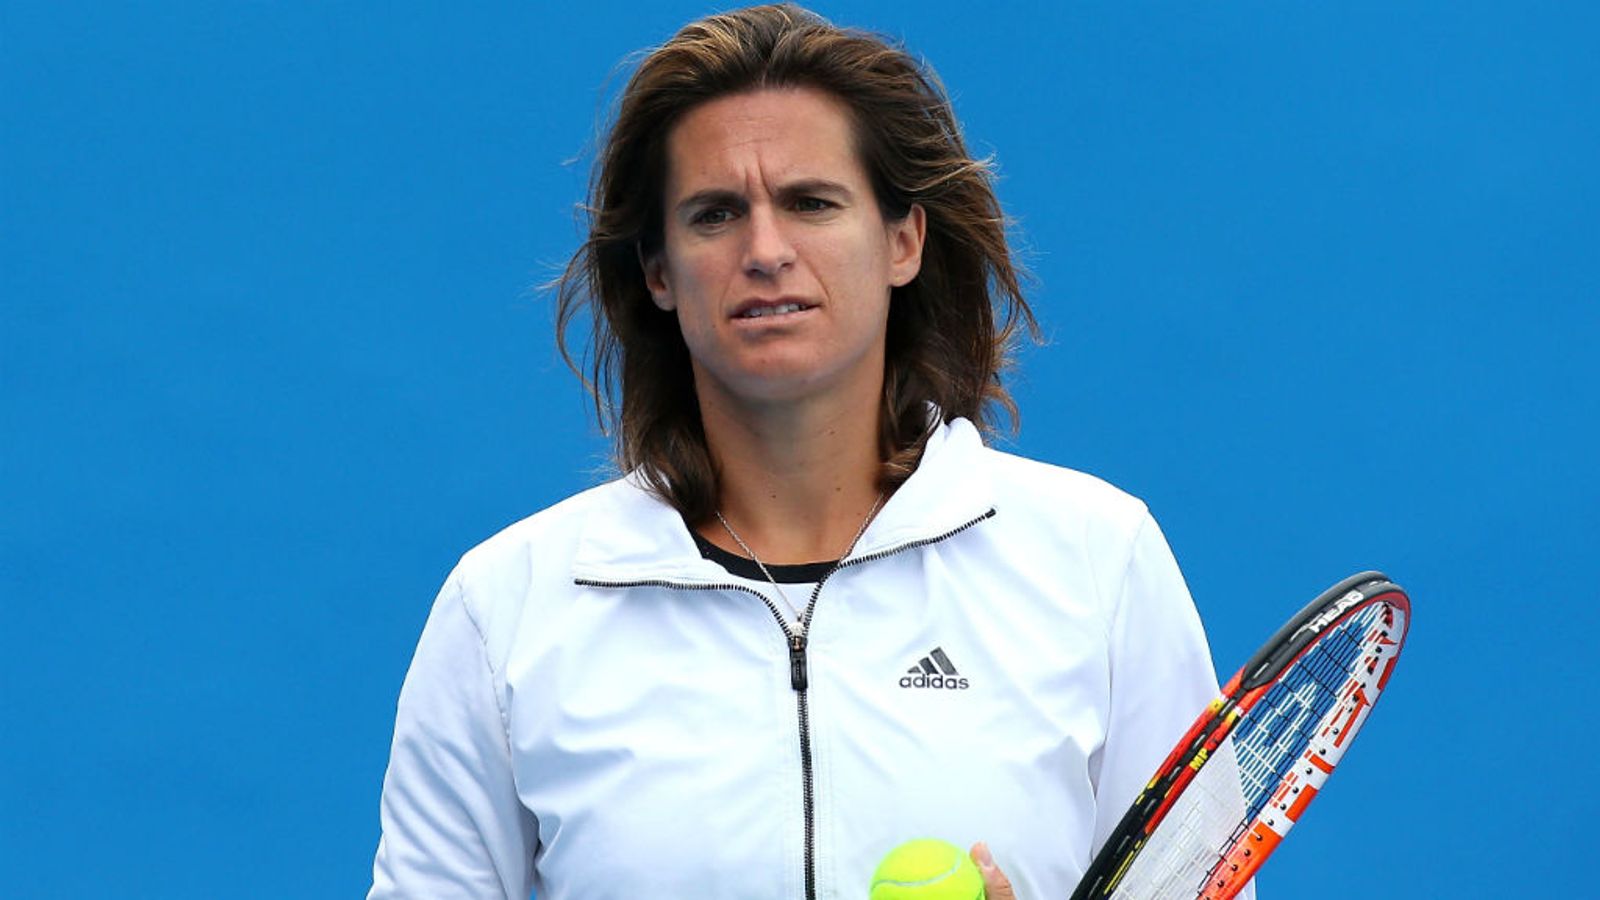 Amelie Mauresmo announces she is expecting her first child.